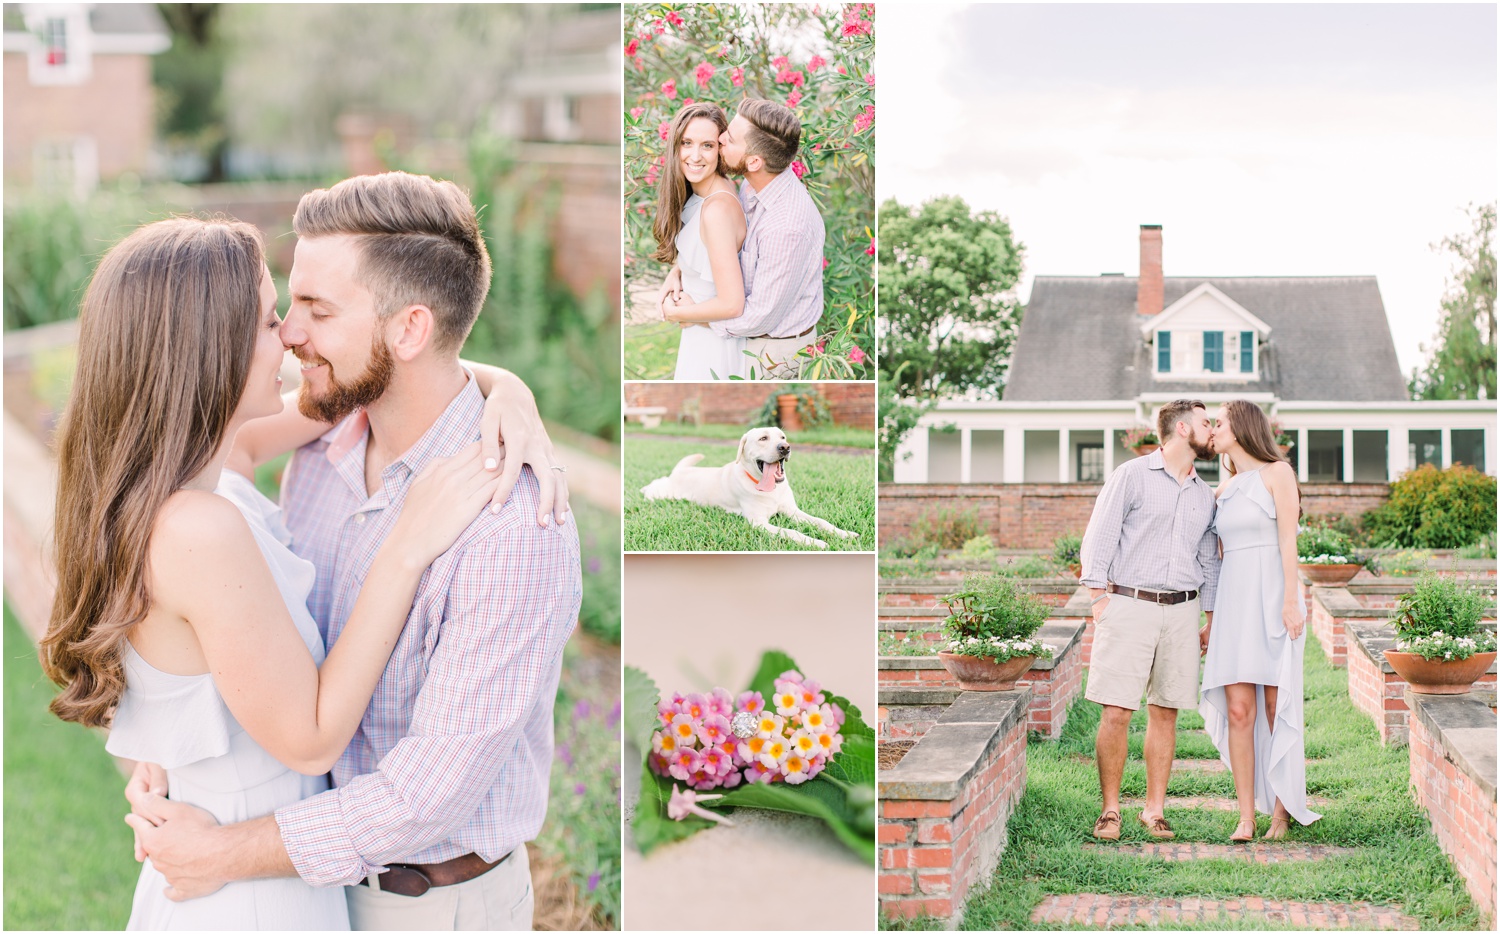 A southern engagement session at Pebble Hill Plantation